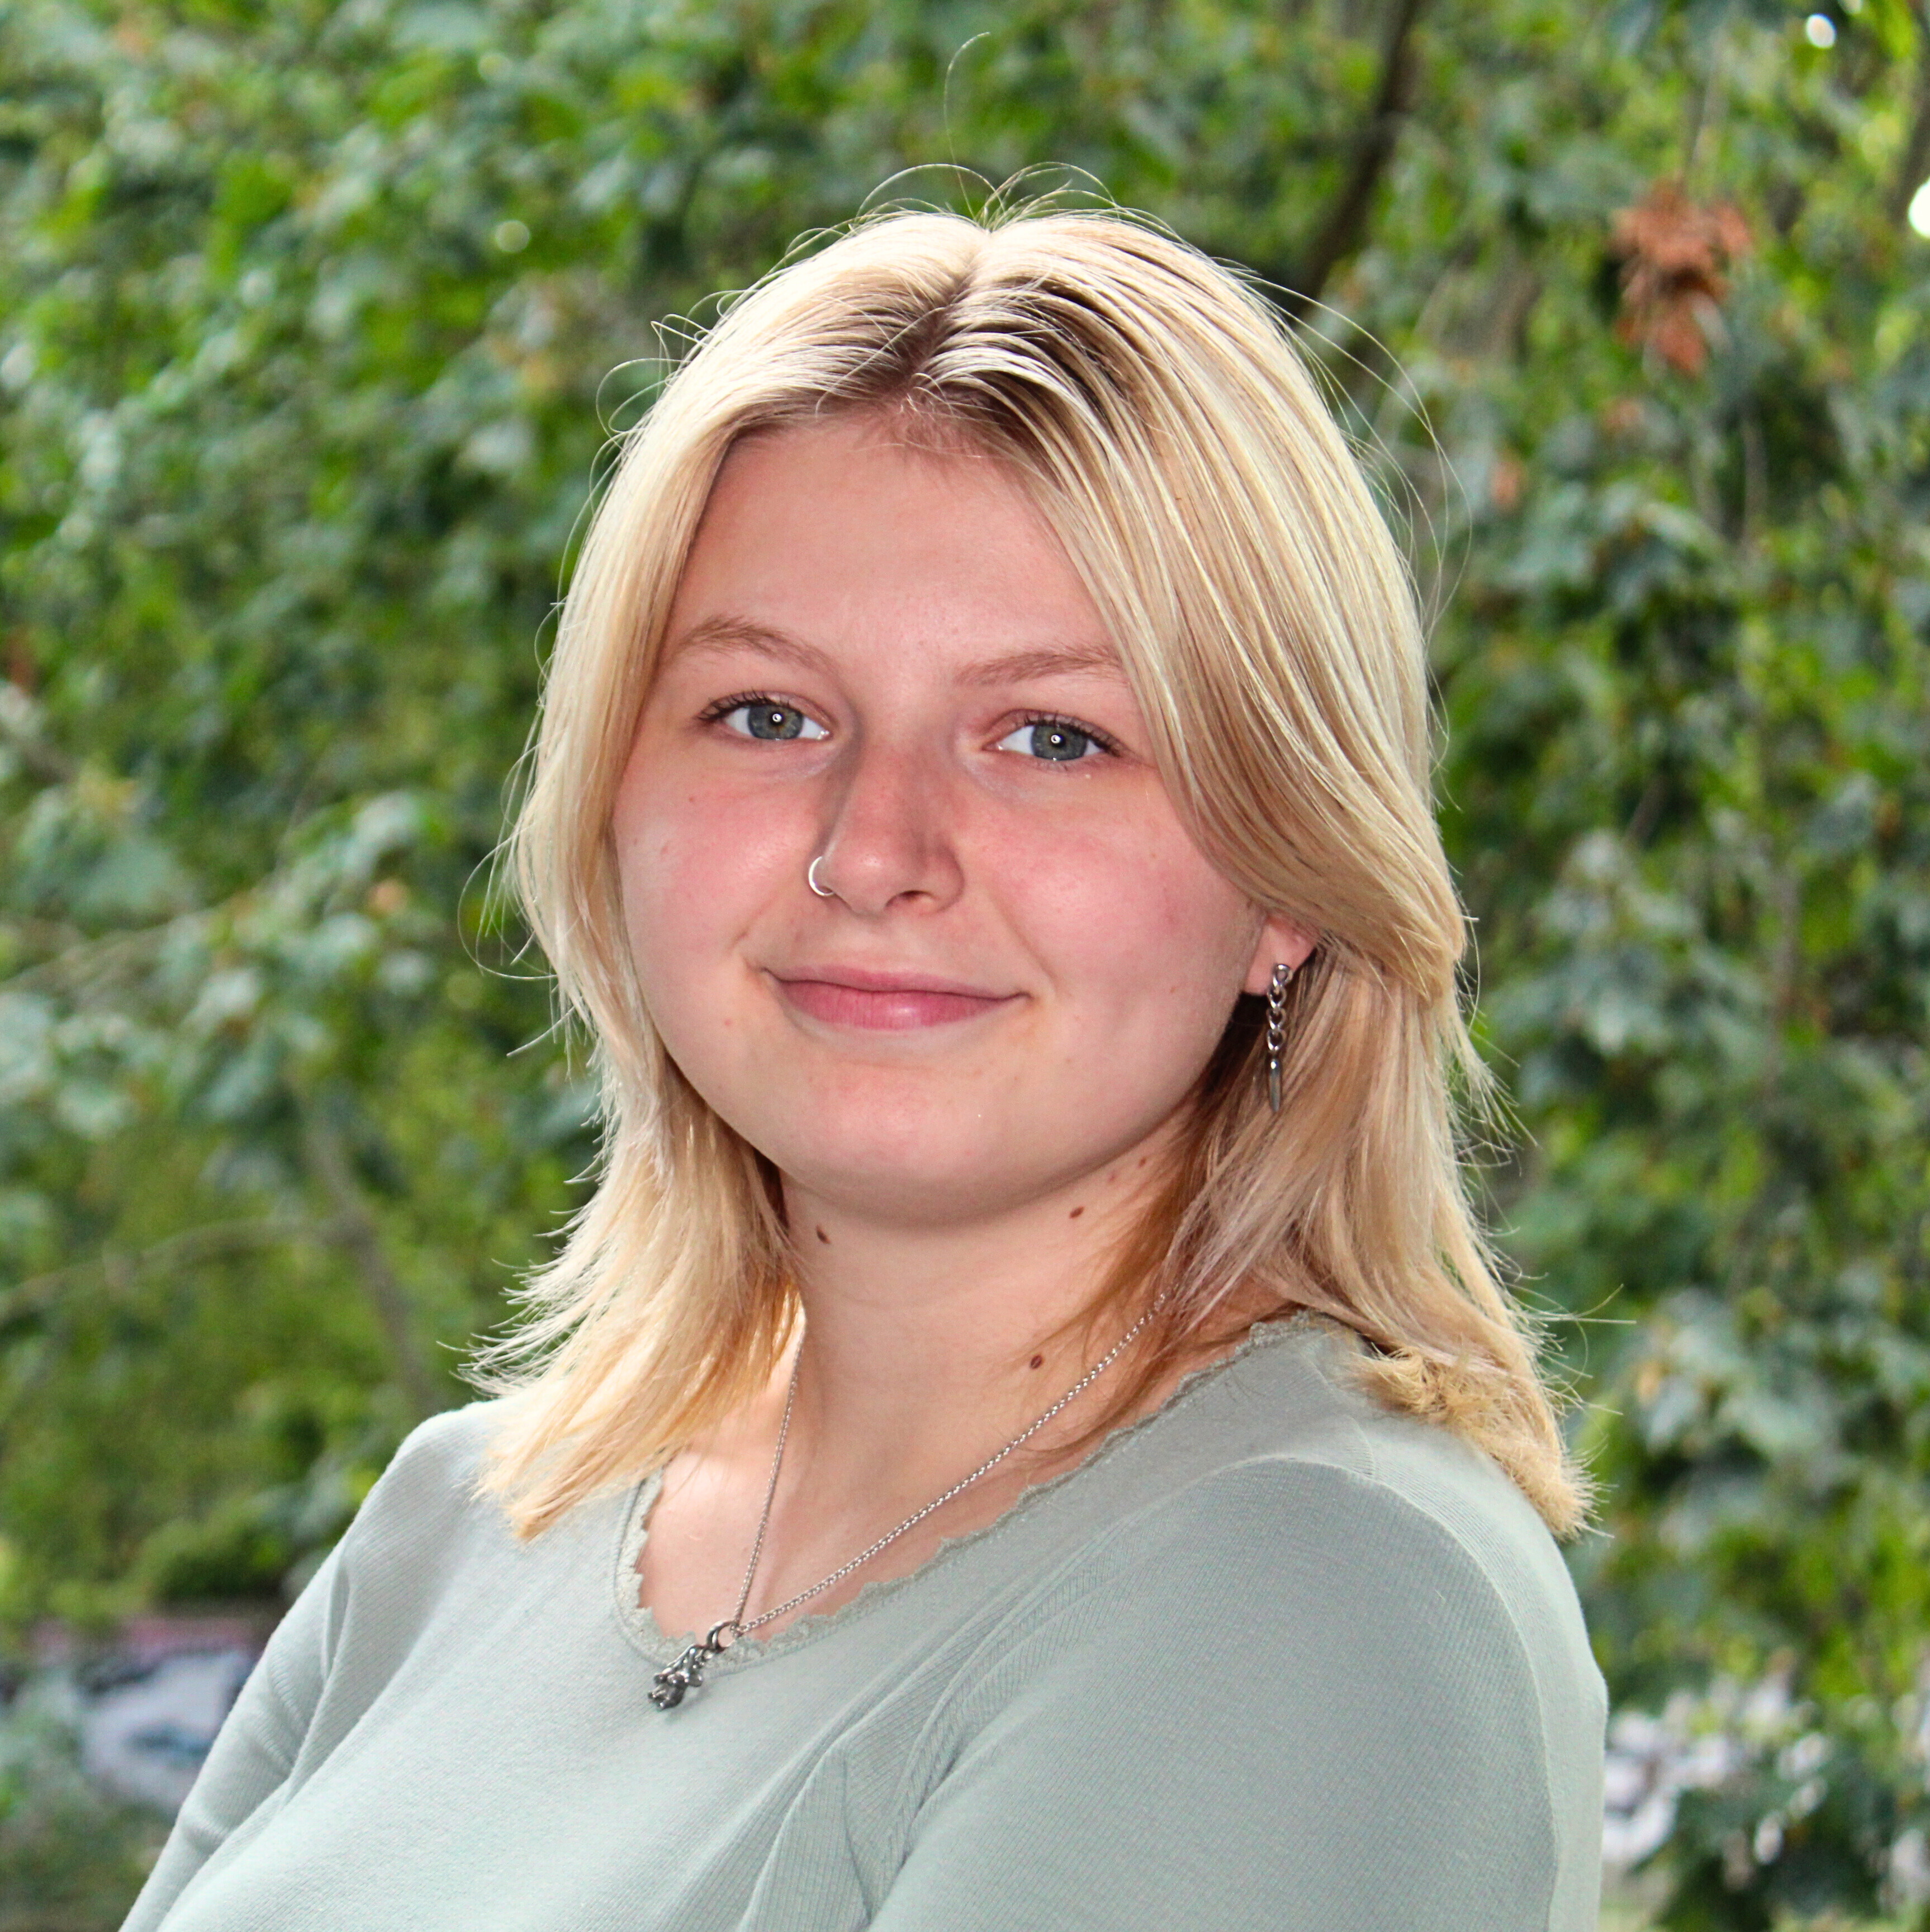 Charlotte Heesch is doing an FÖJ in marketing at Besondere Orte.